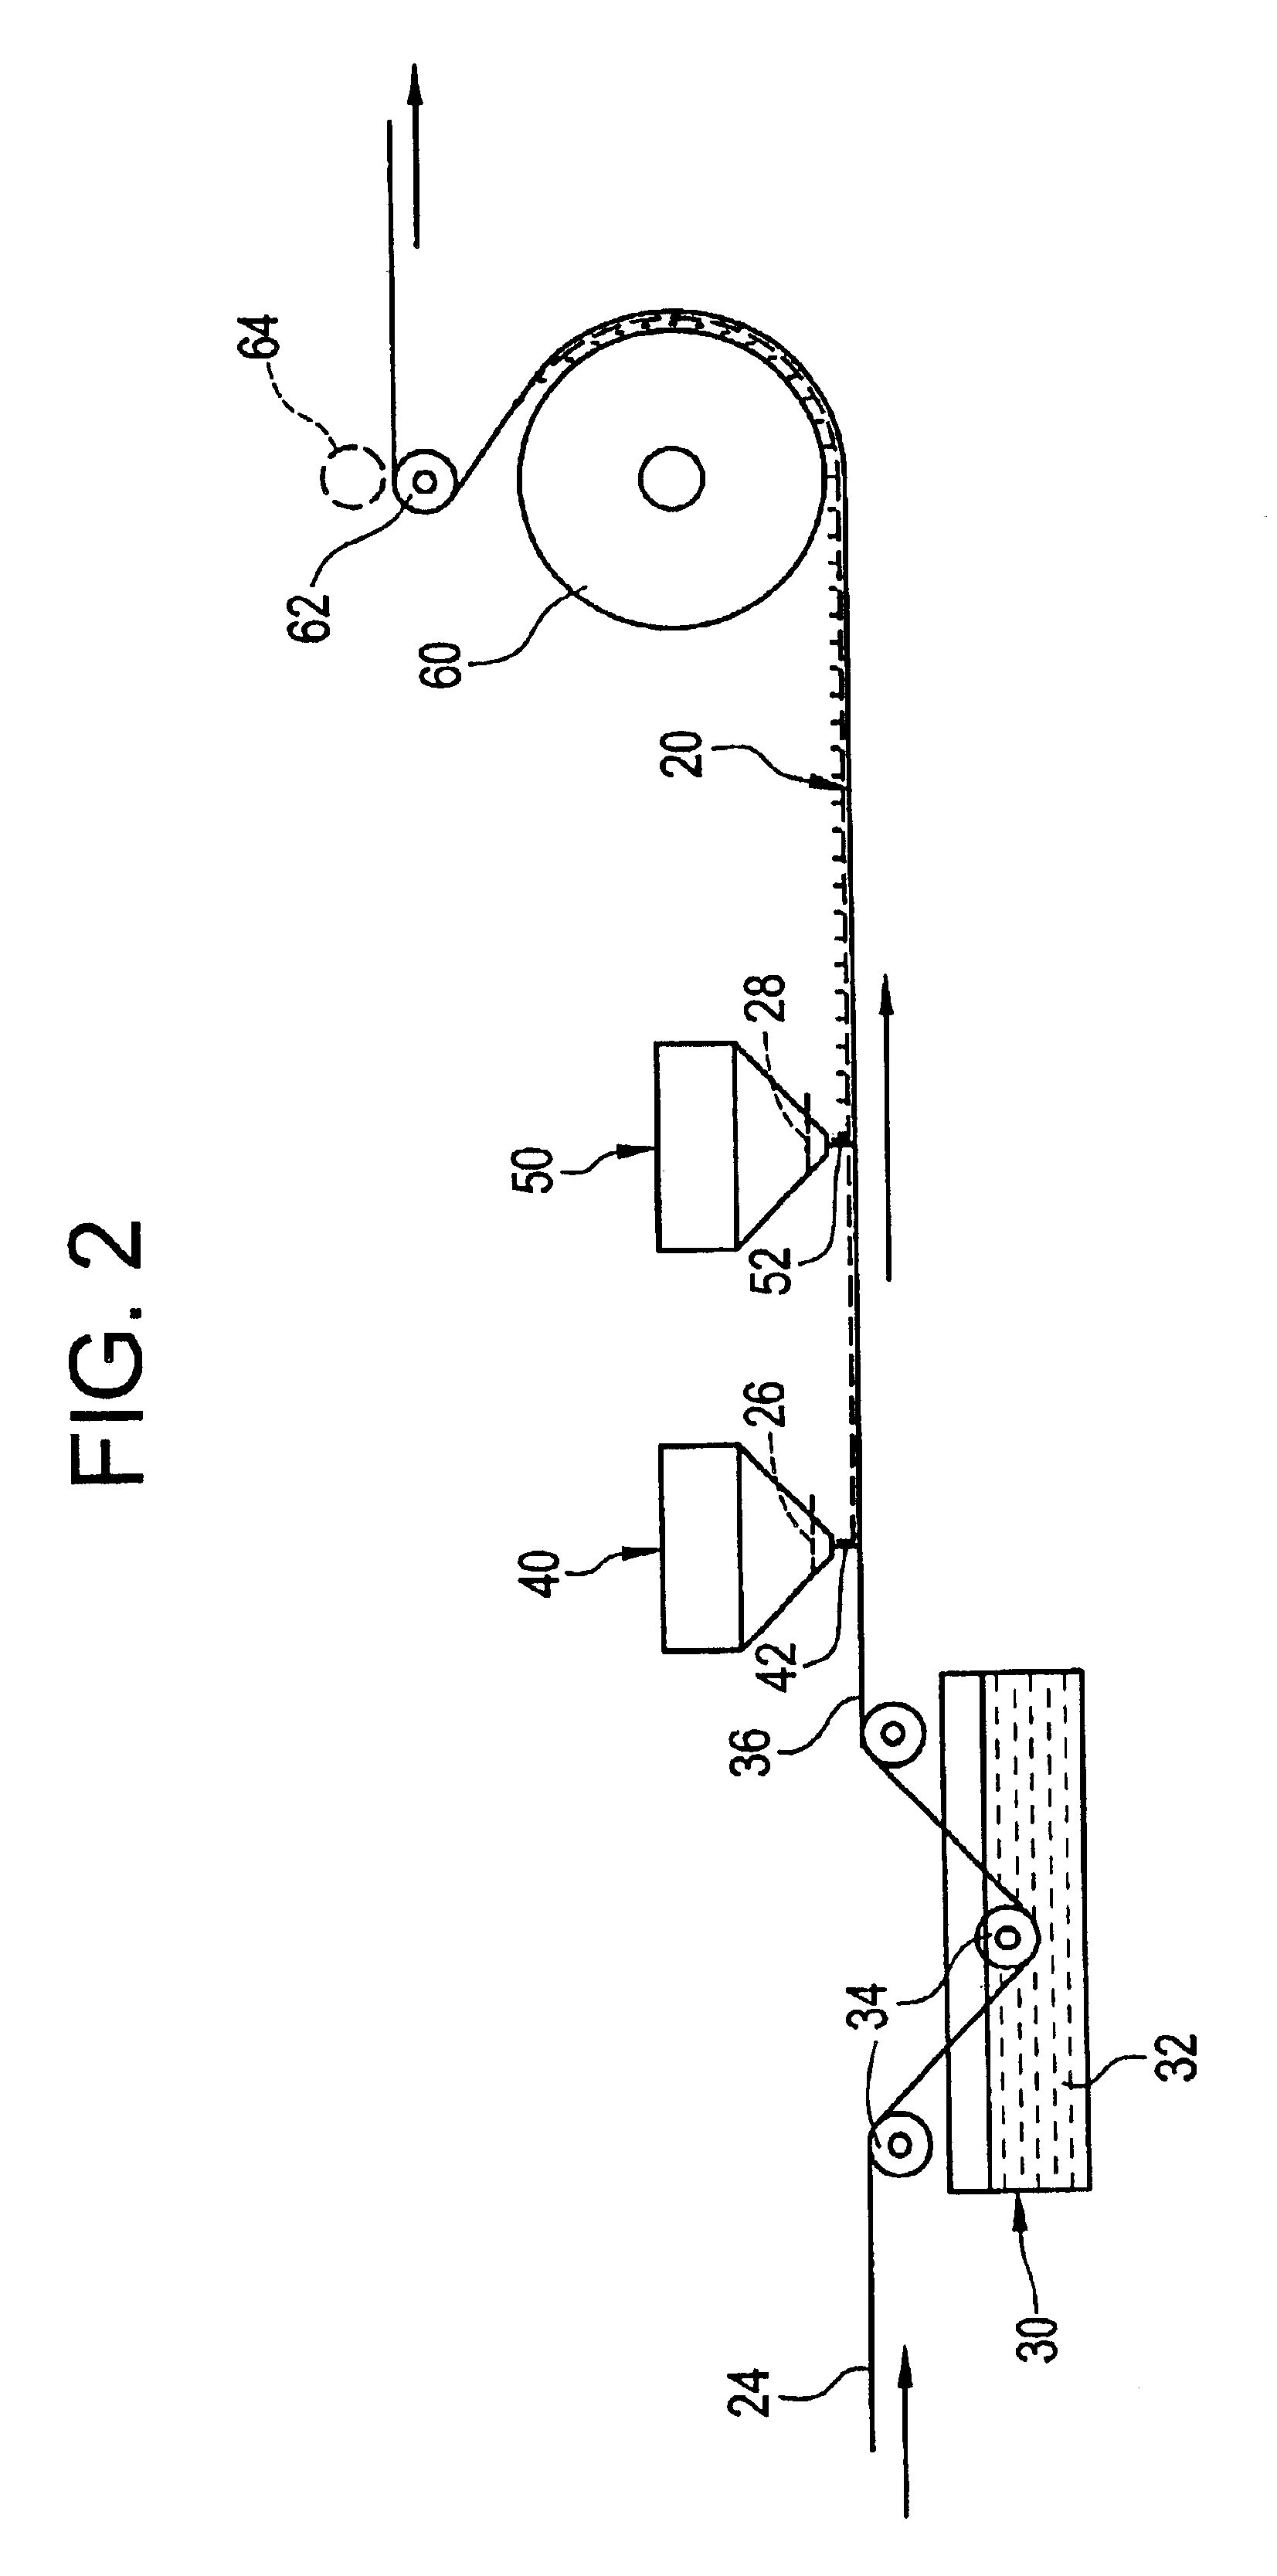 Method of forming an improved roofing material